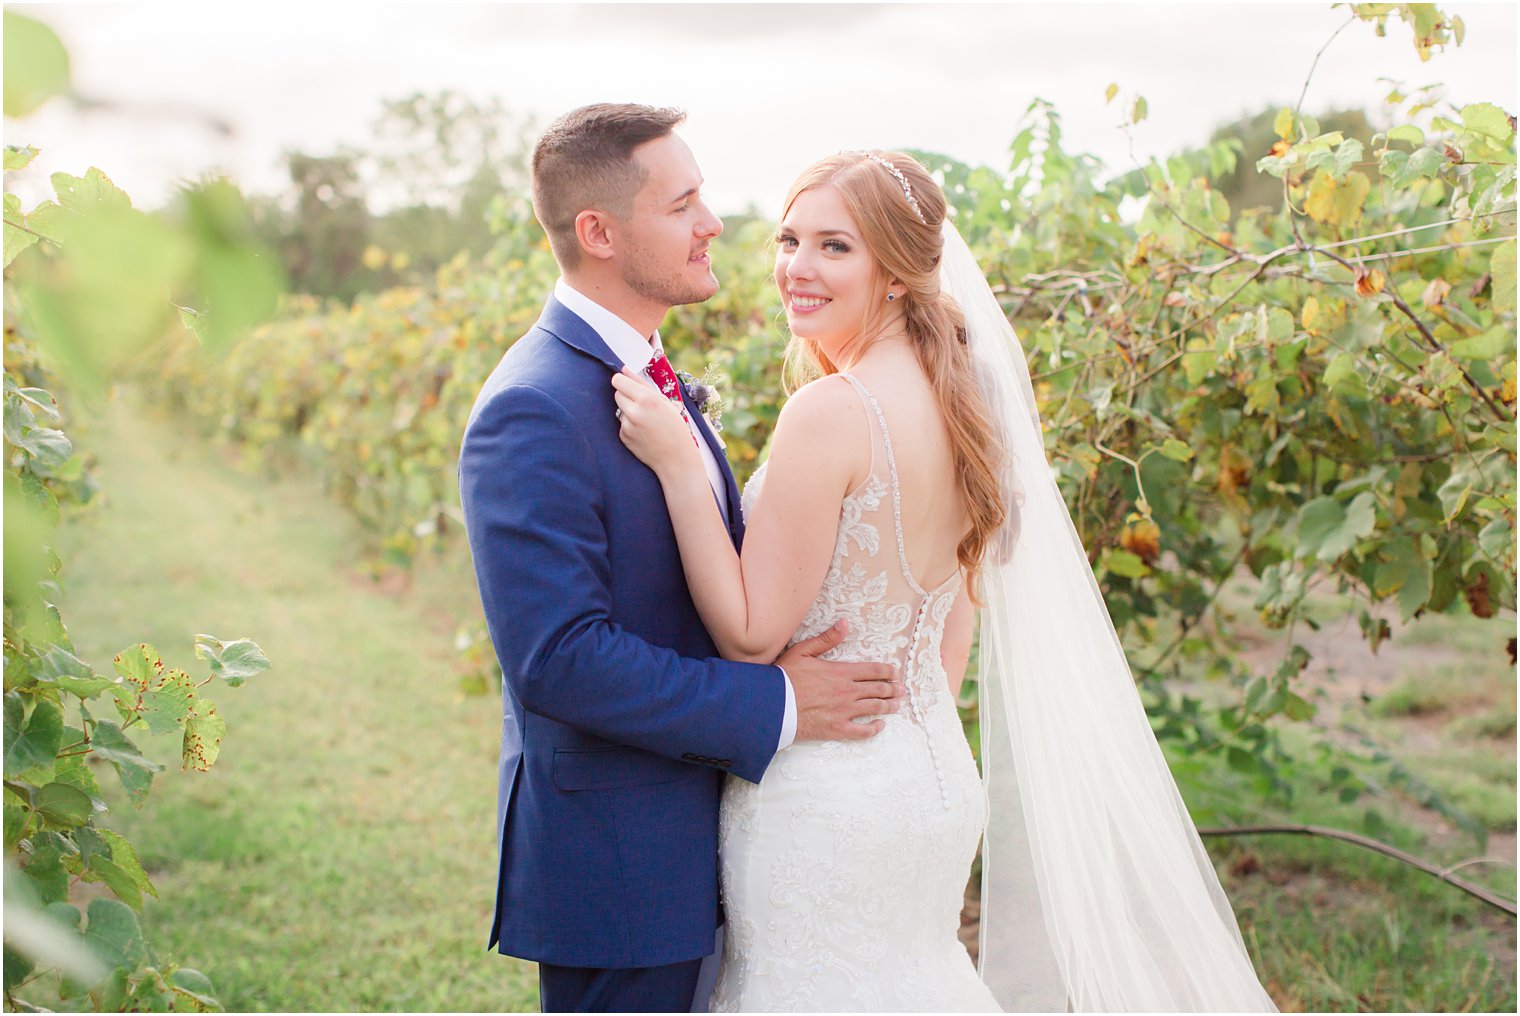 Romantic photo of bride and groom in a vineyard